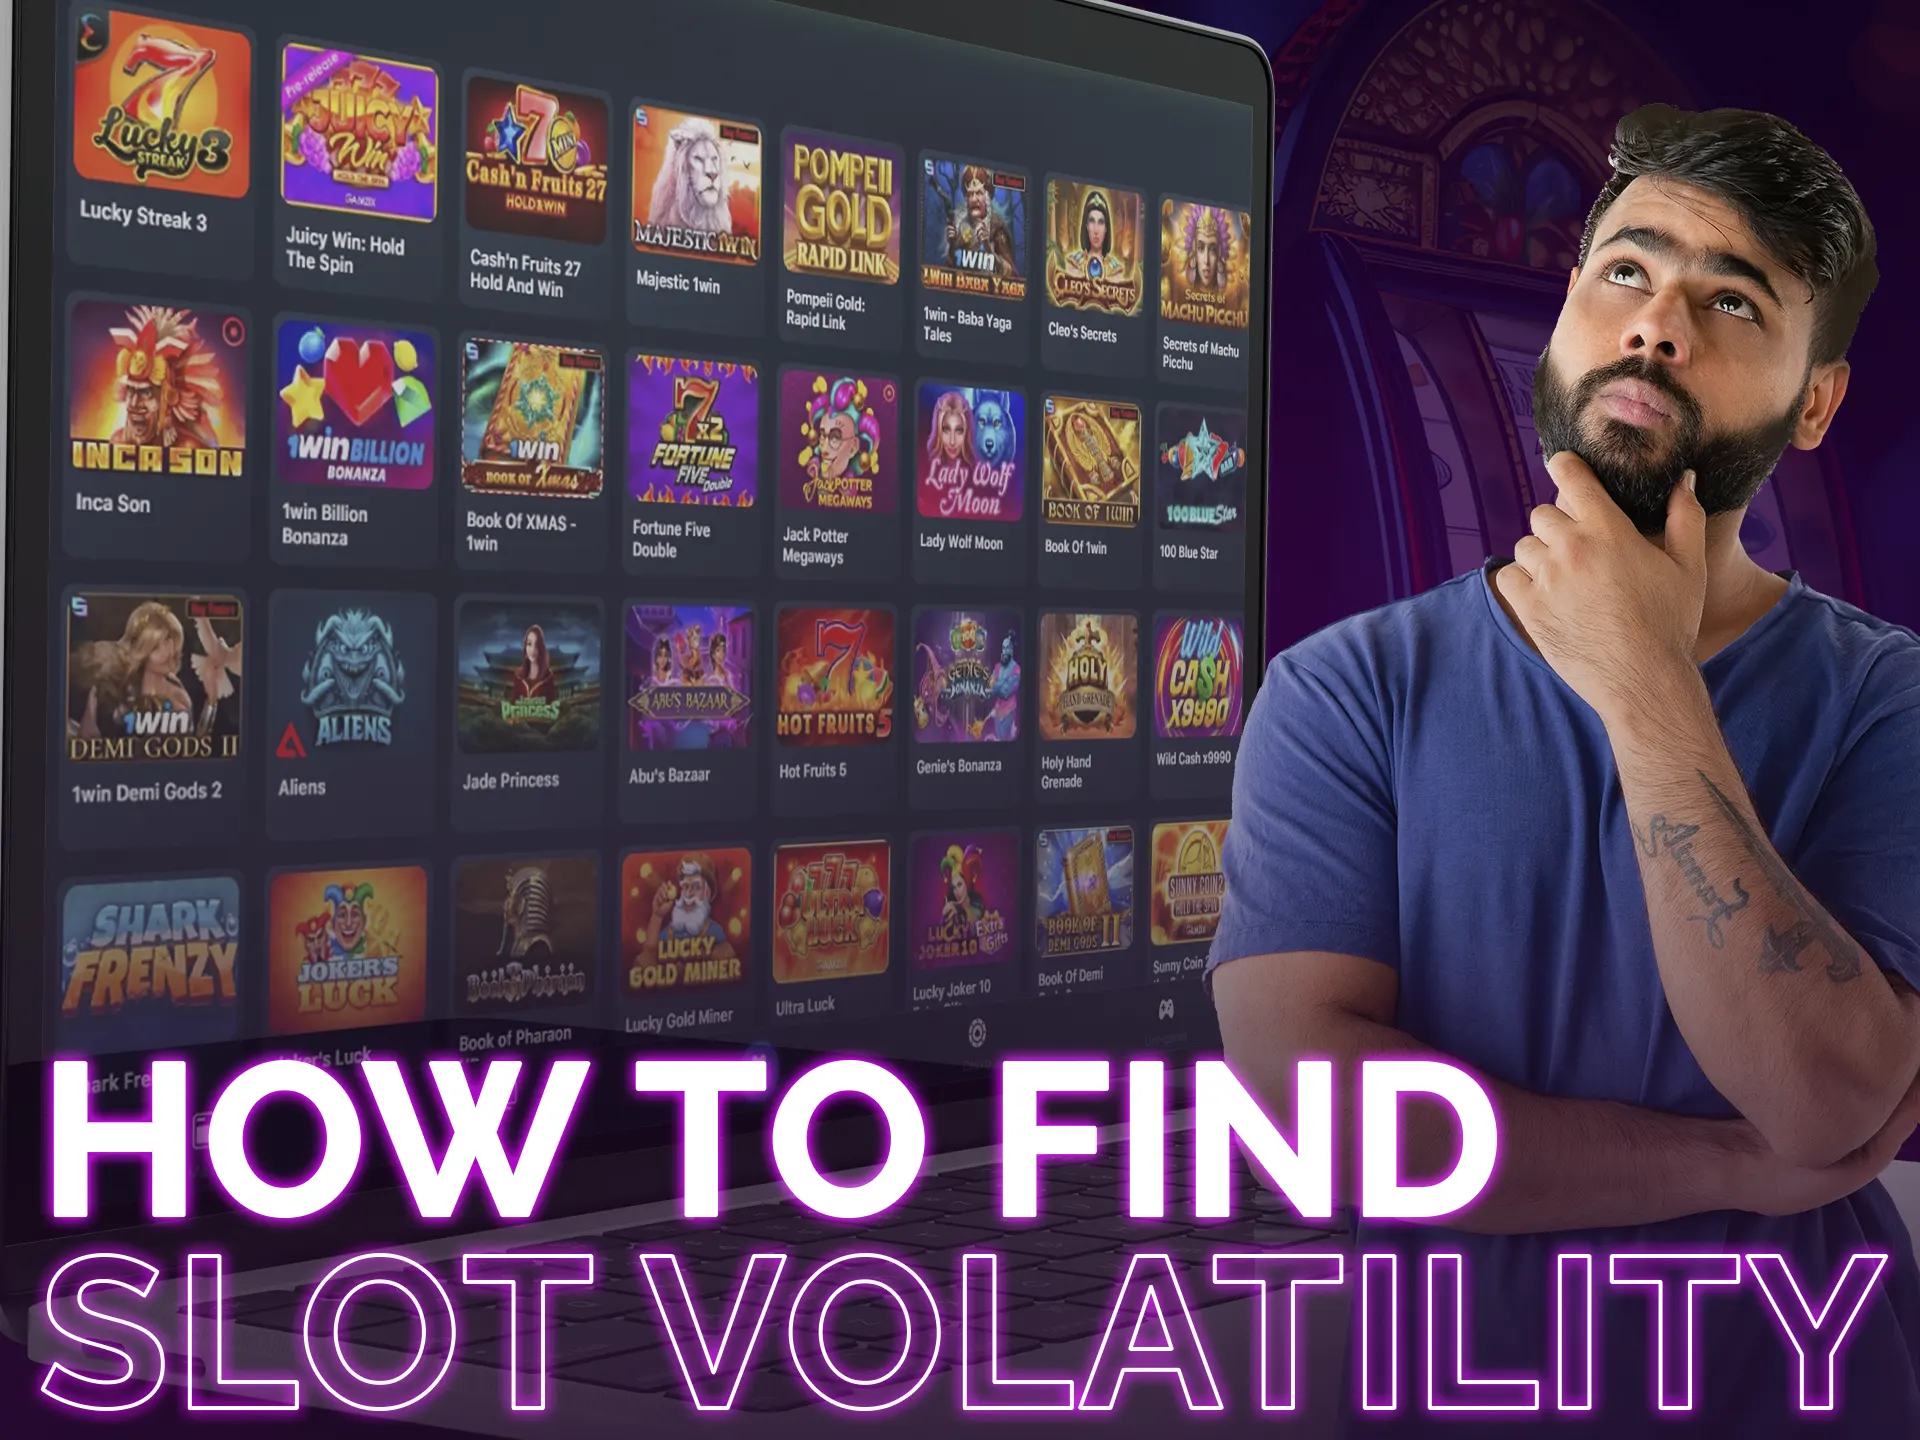 Find slot volatility on our website or provider's info.